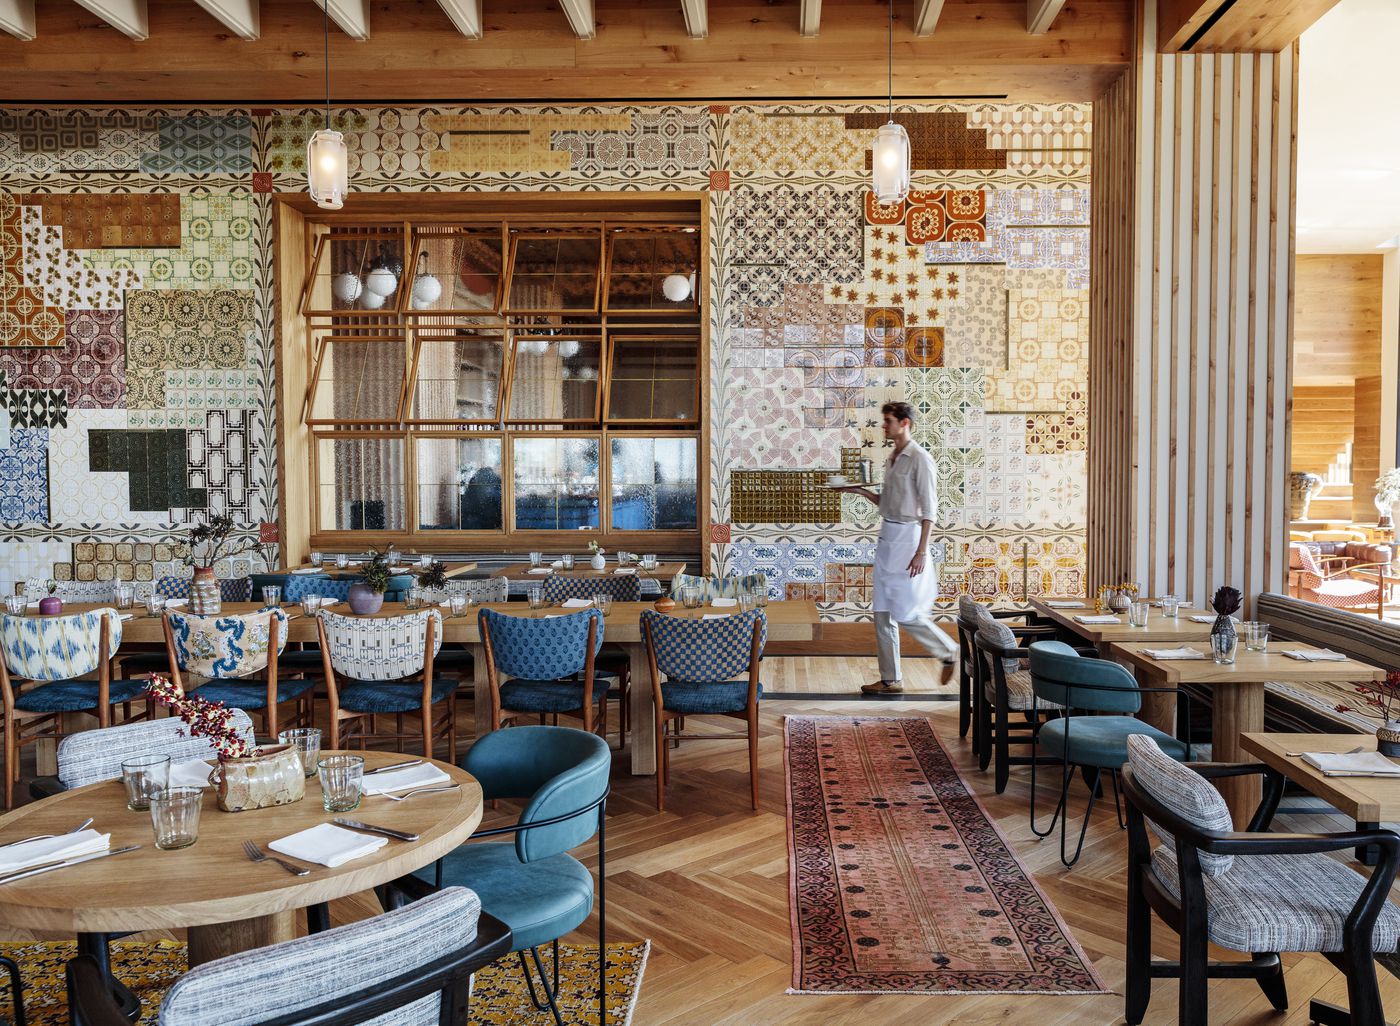 The 33 Best Restaurants In Austin, Austin Restaurants With Private Dining Rooms